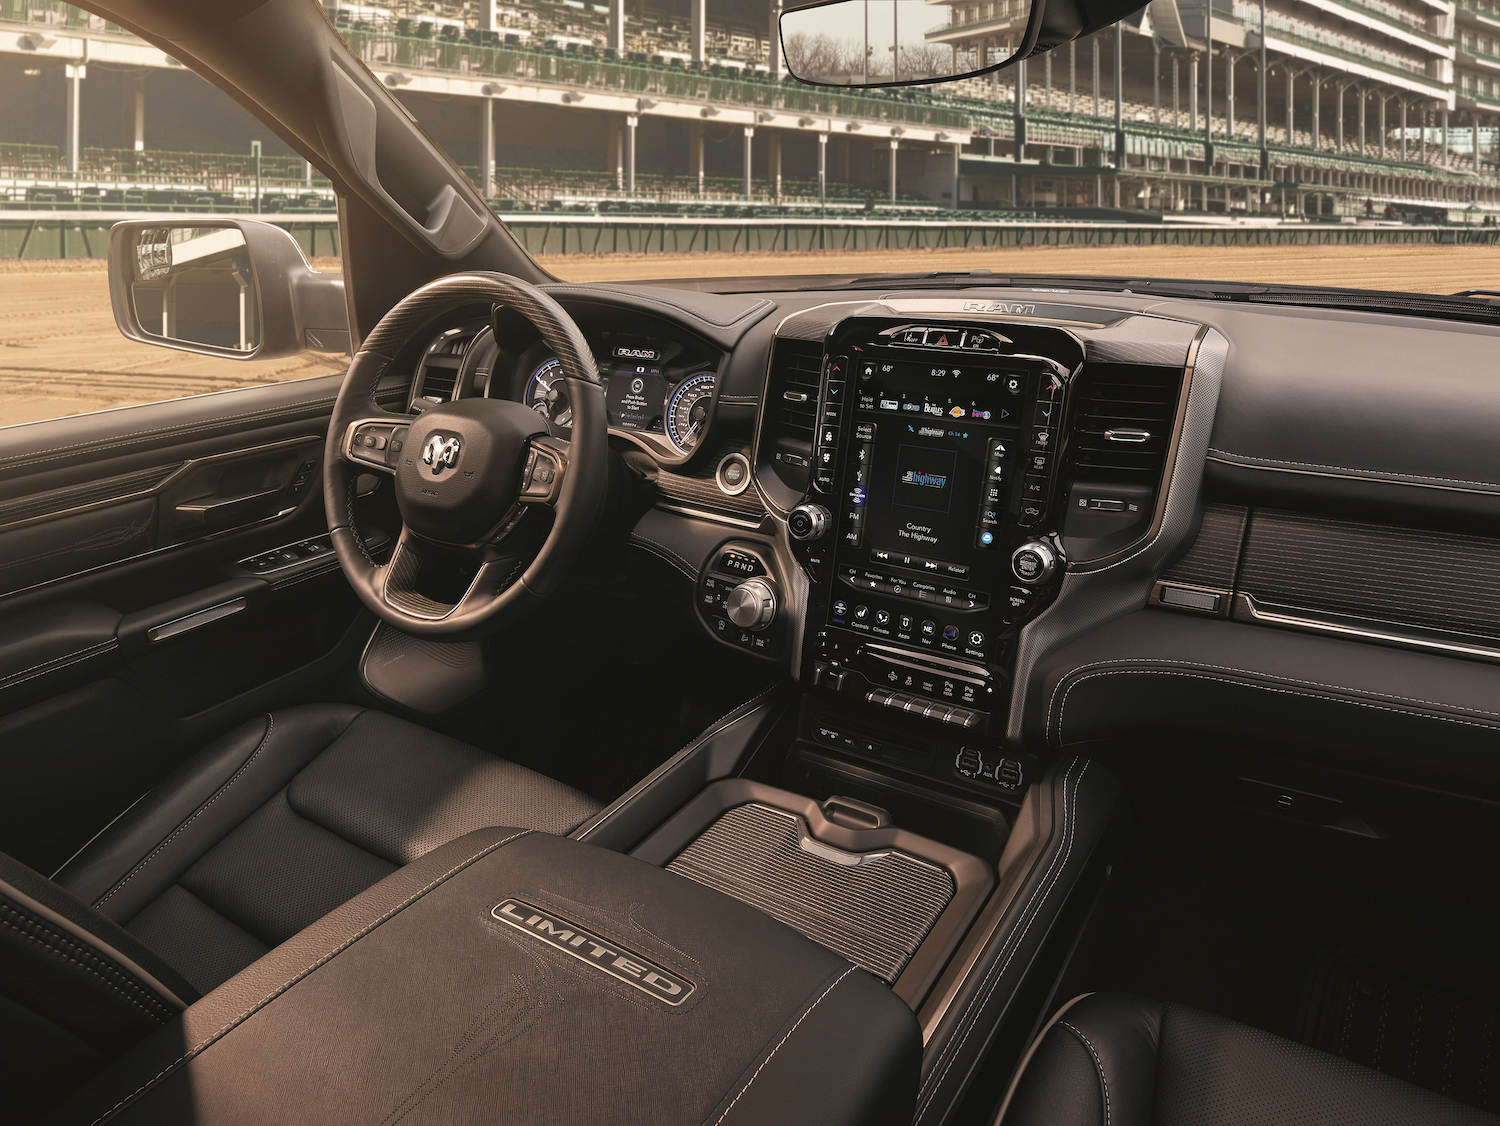 The leather interior of a special edition 2019 Ram 1500 truck, complete with 12-inch infotainment touchscreen.